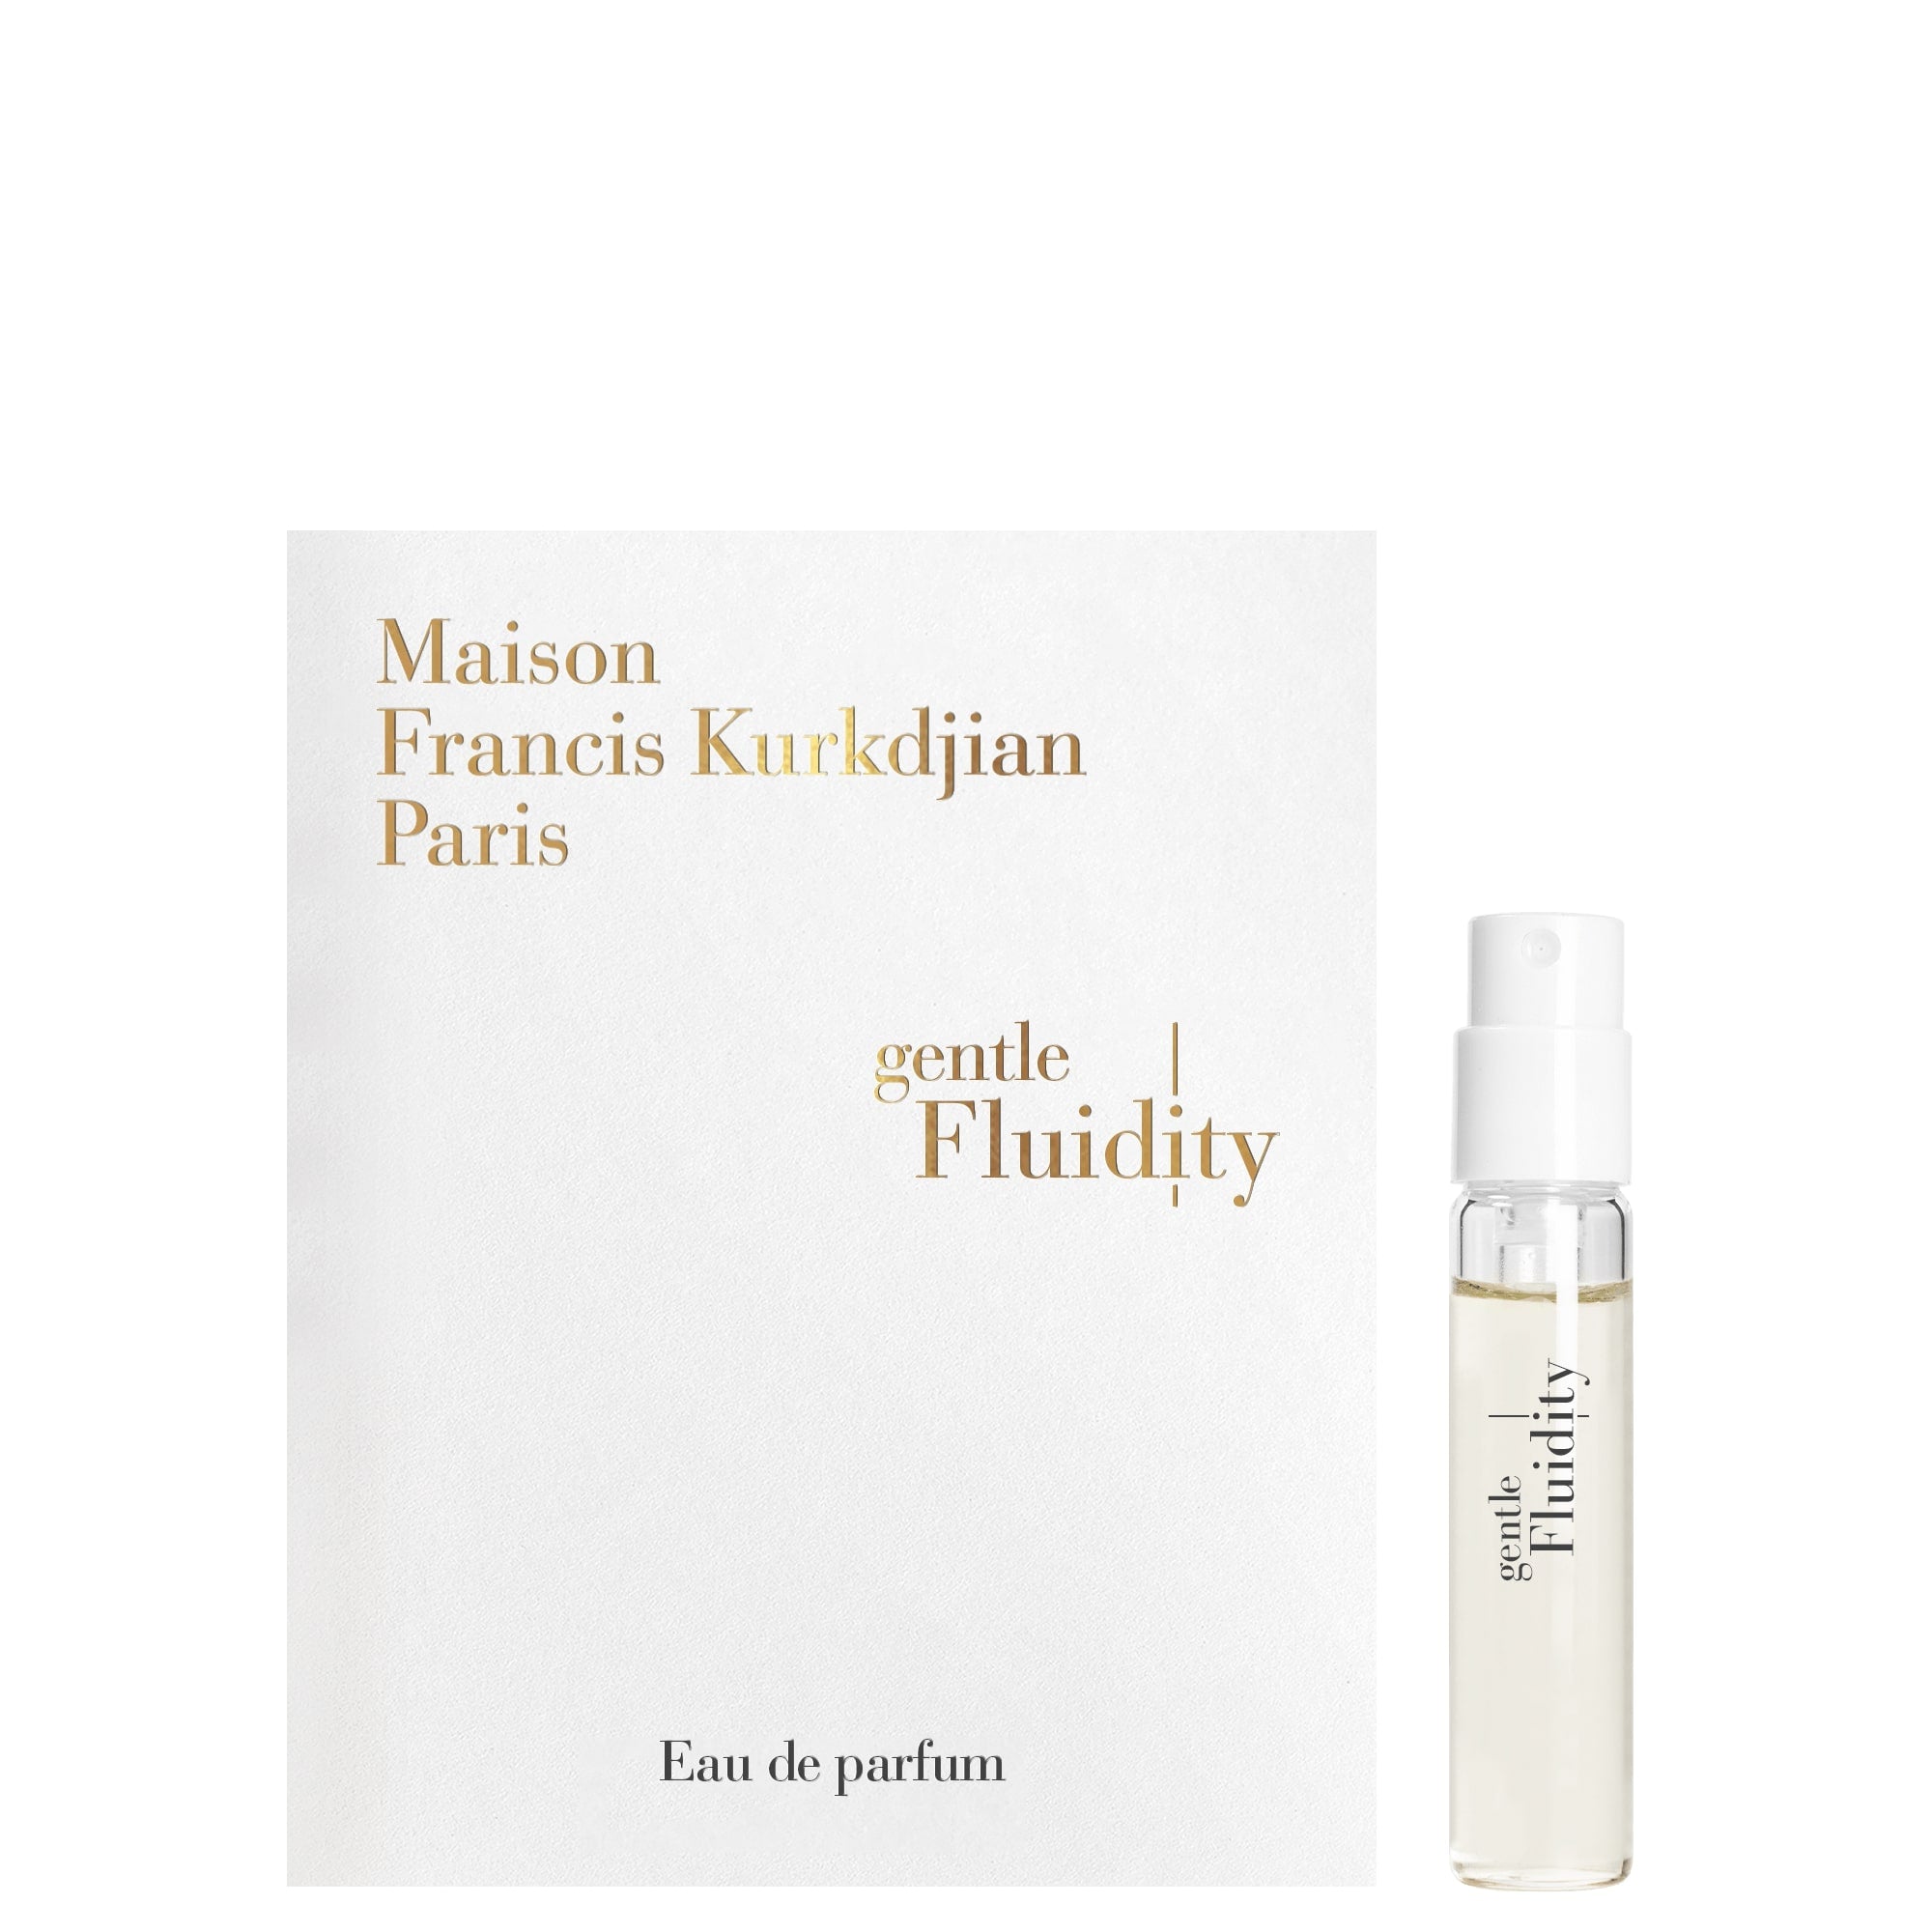 Gentle Fluidity Gold Edition